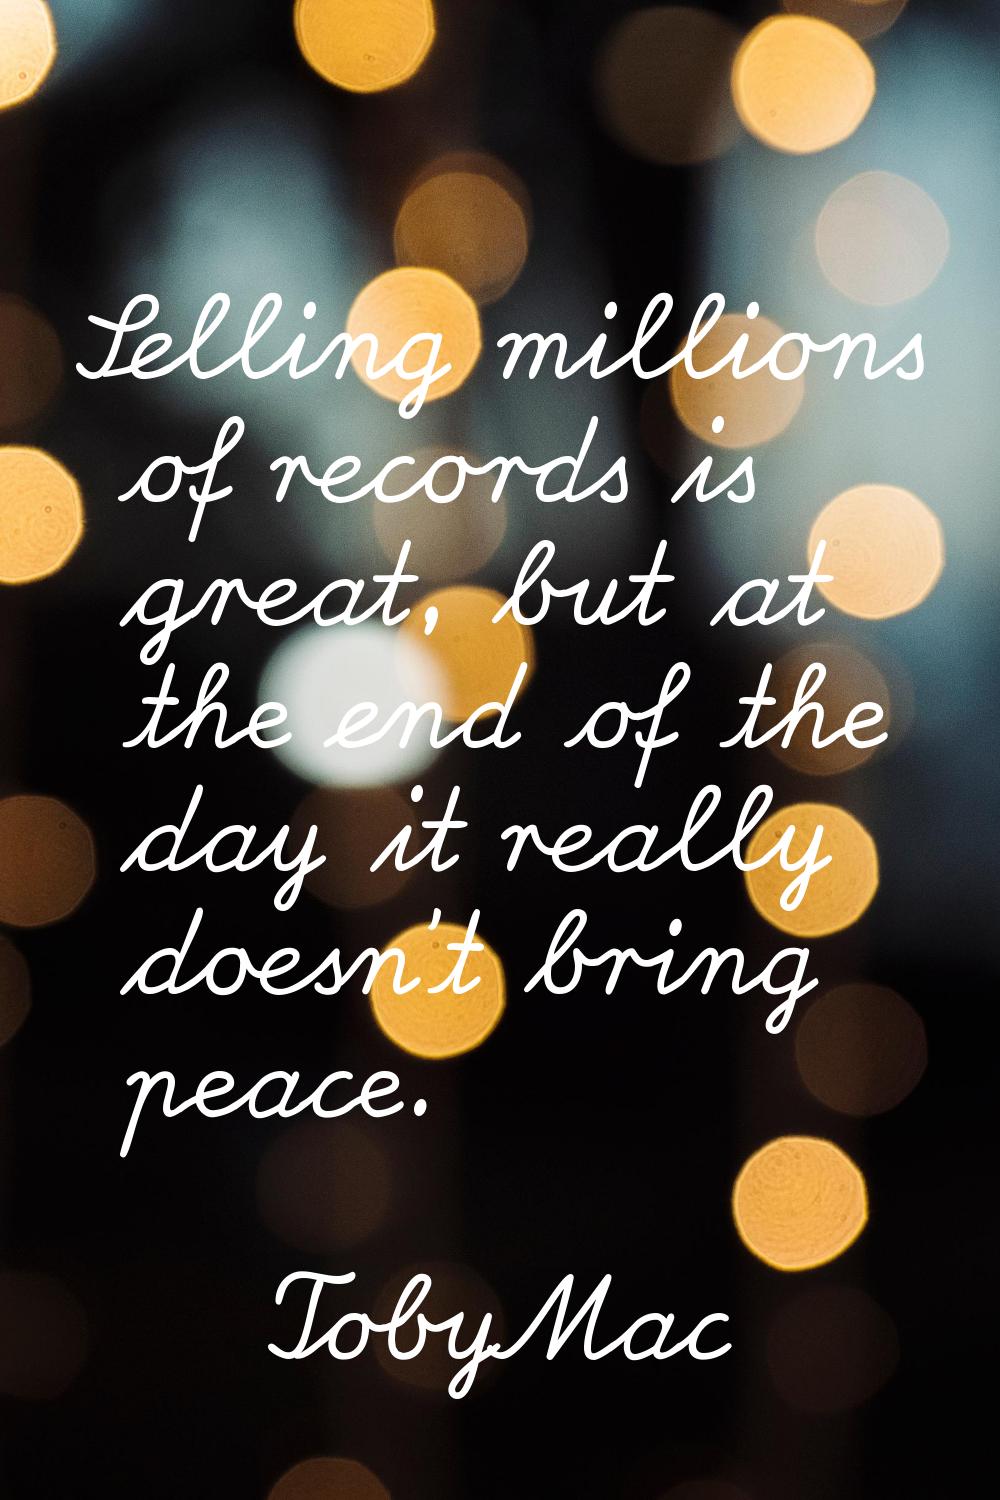 Selling millions of records is great, but at the end of the day it really doesn't bring peace.